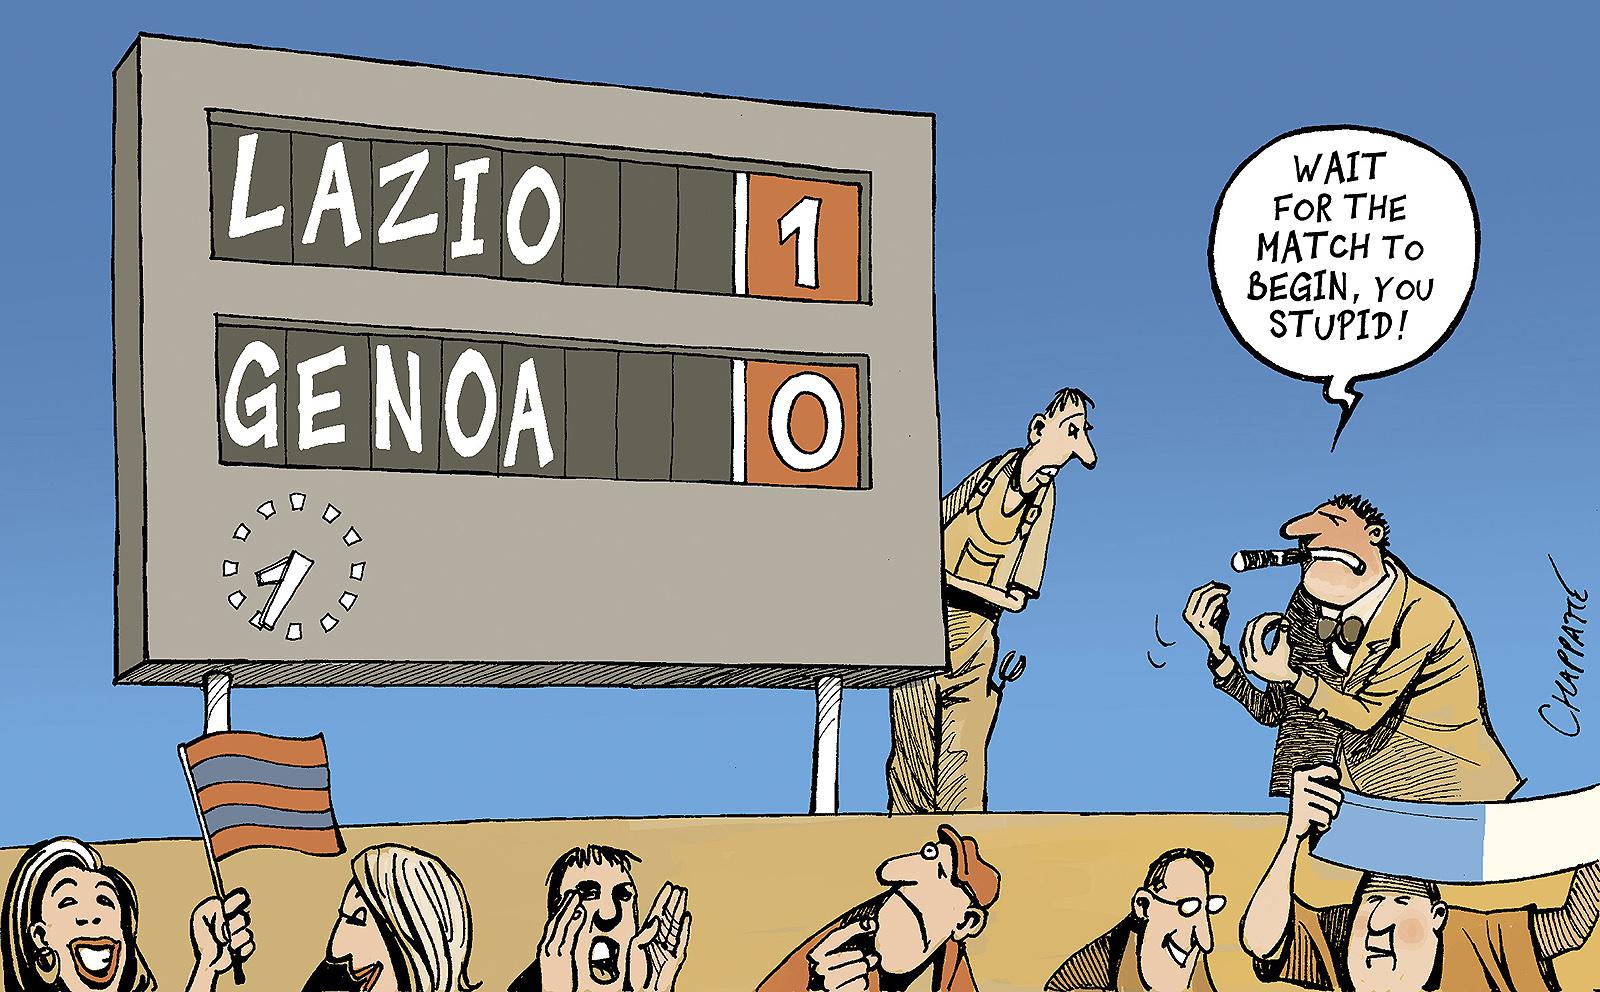 Match-Fixing Scandal In Italy